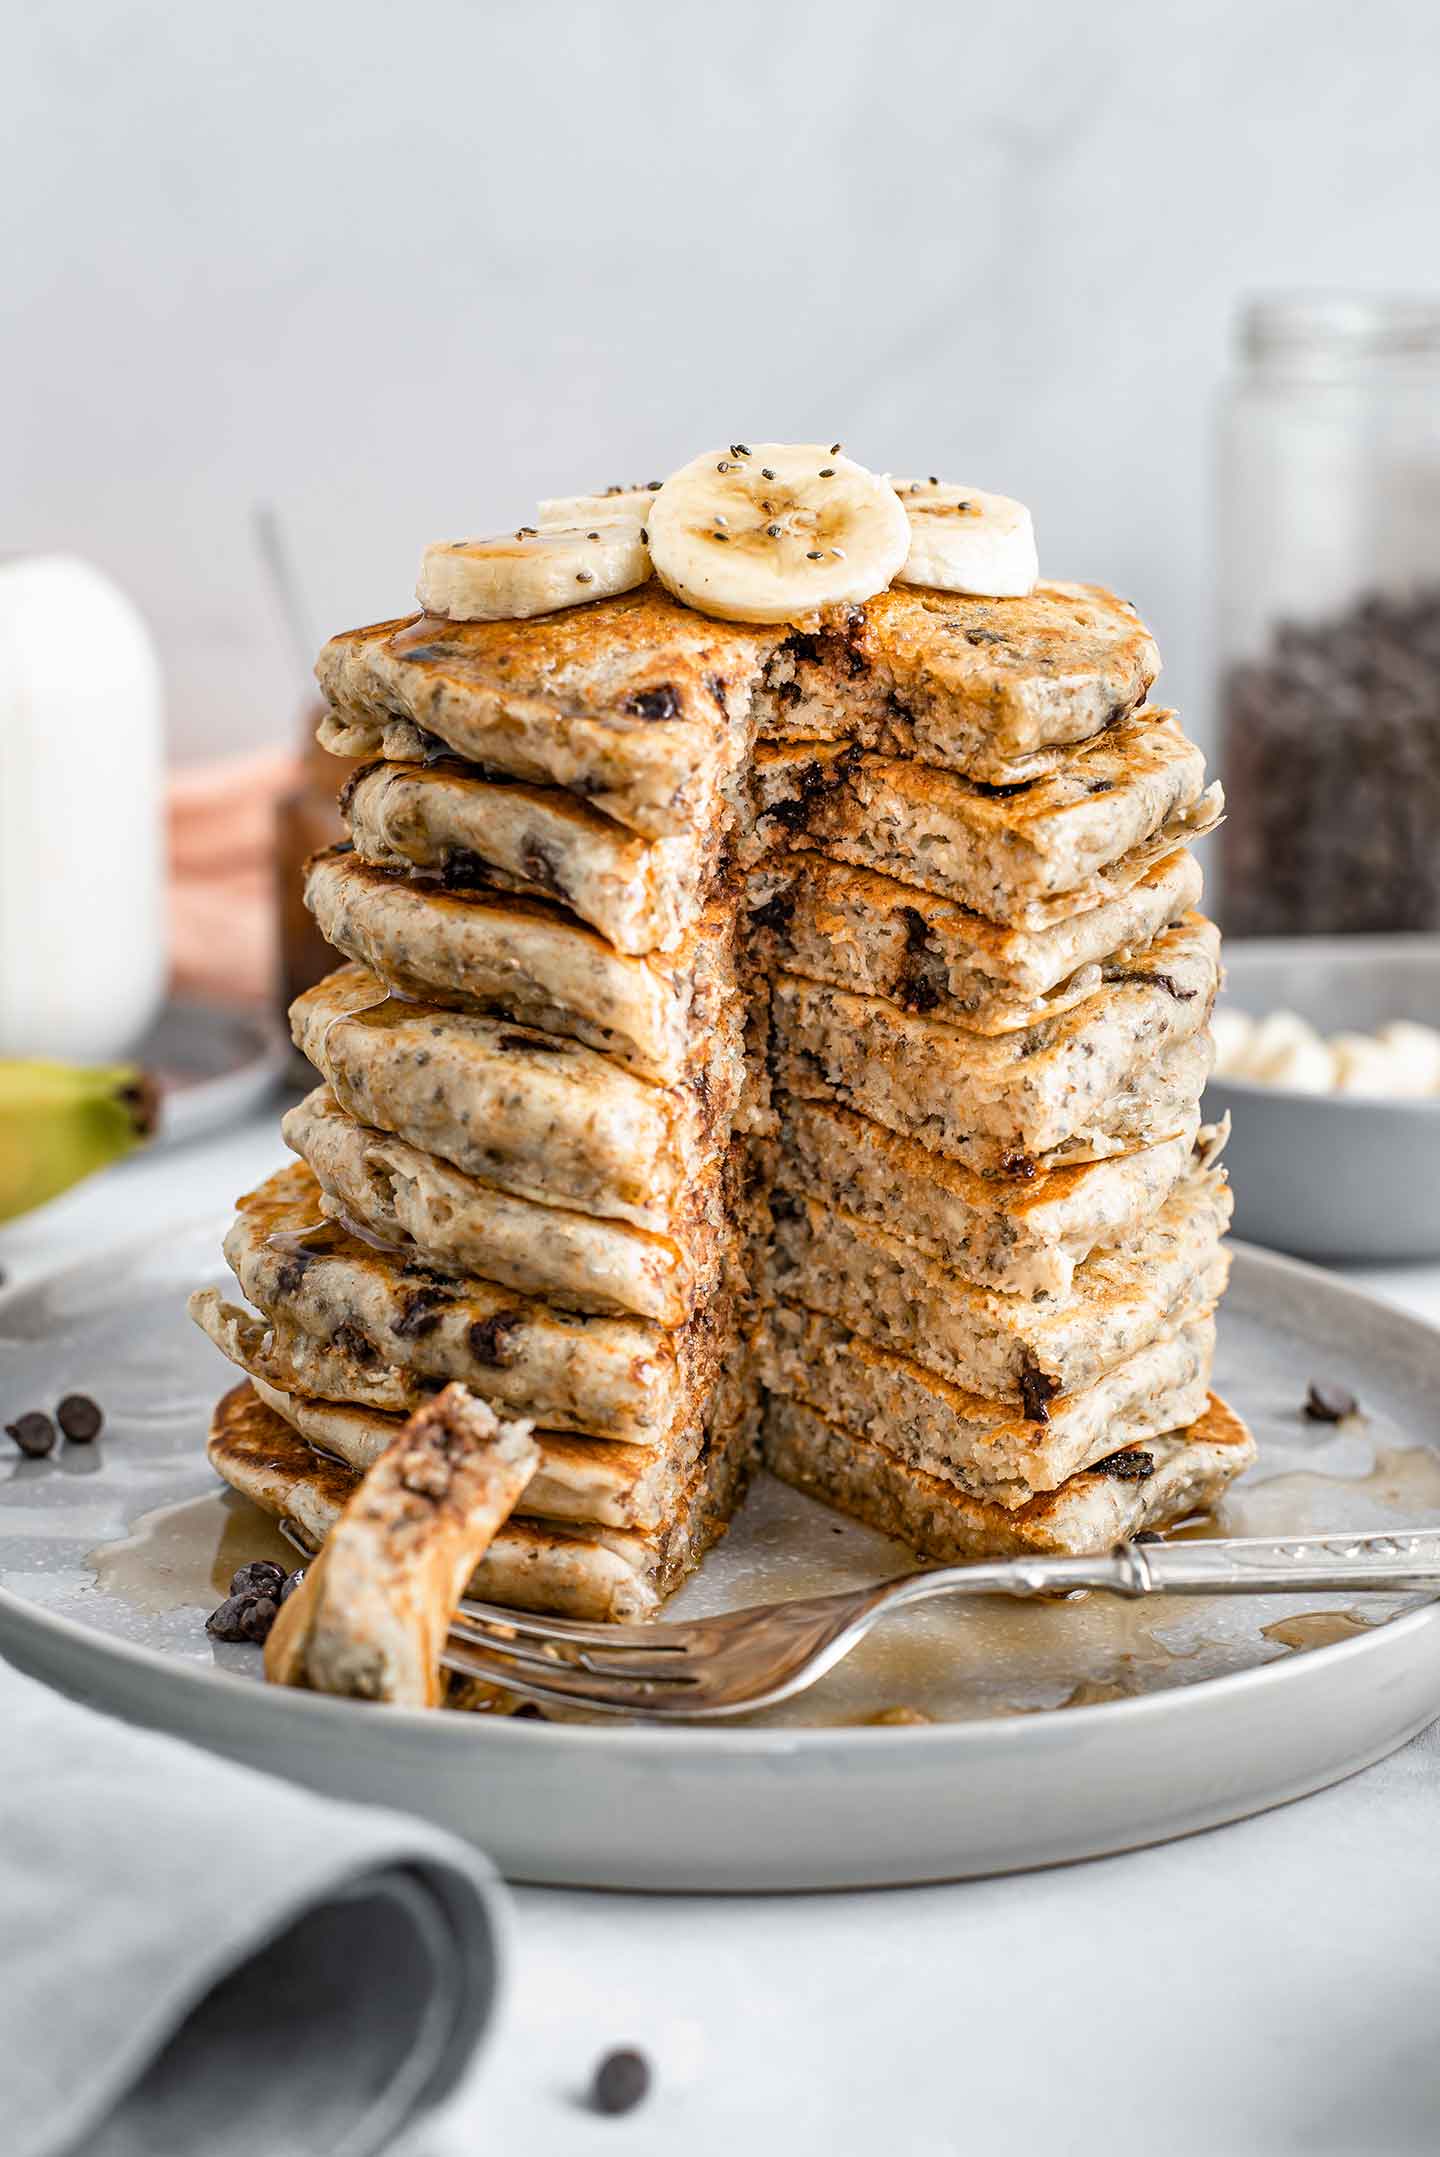 Side view of a tower of pancakes with a triangle cut through all of them. The fluffy, chocolate chip and chia filled insides are visible.